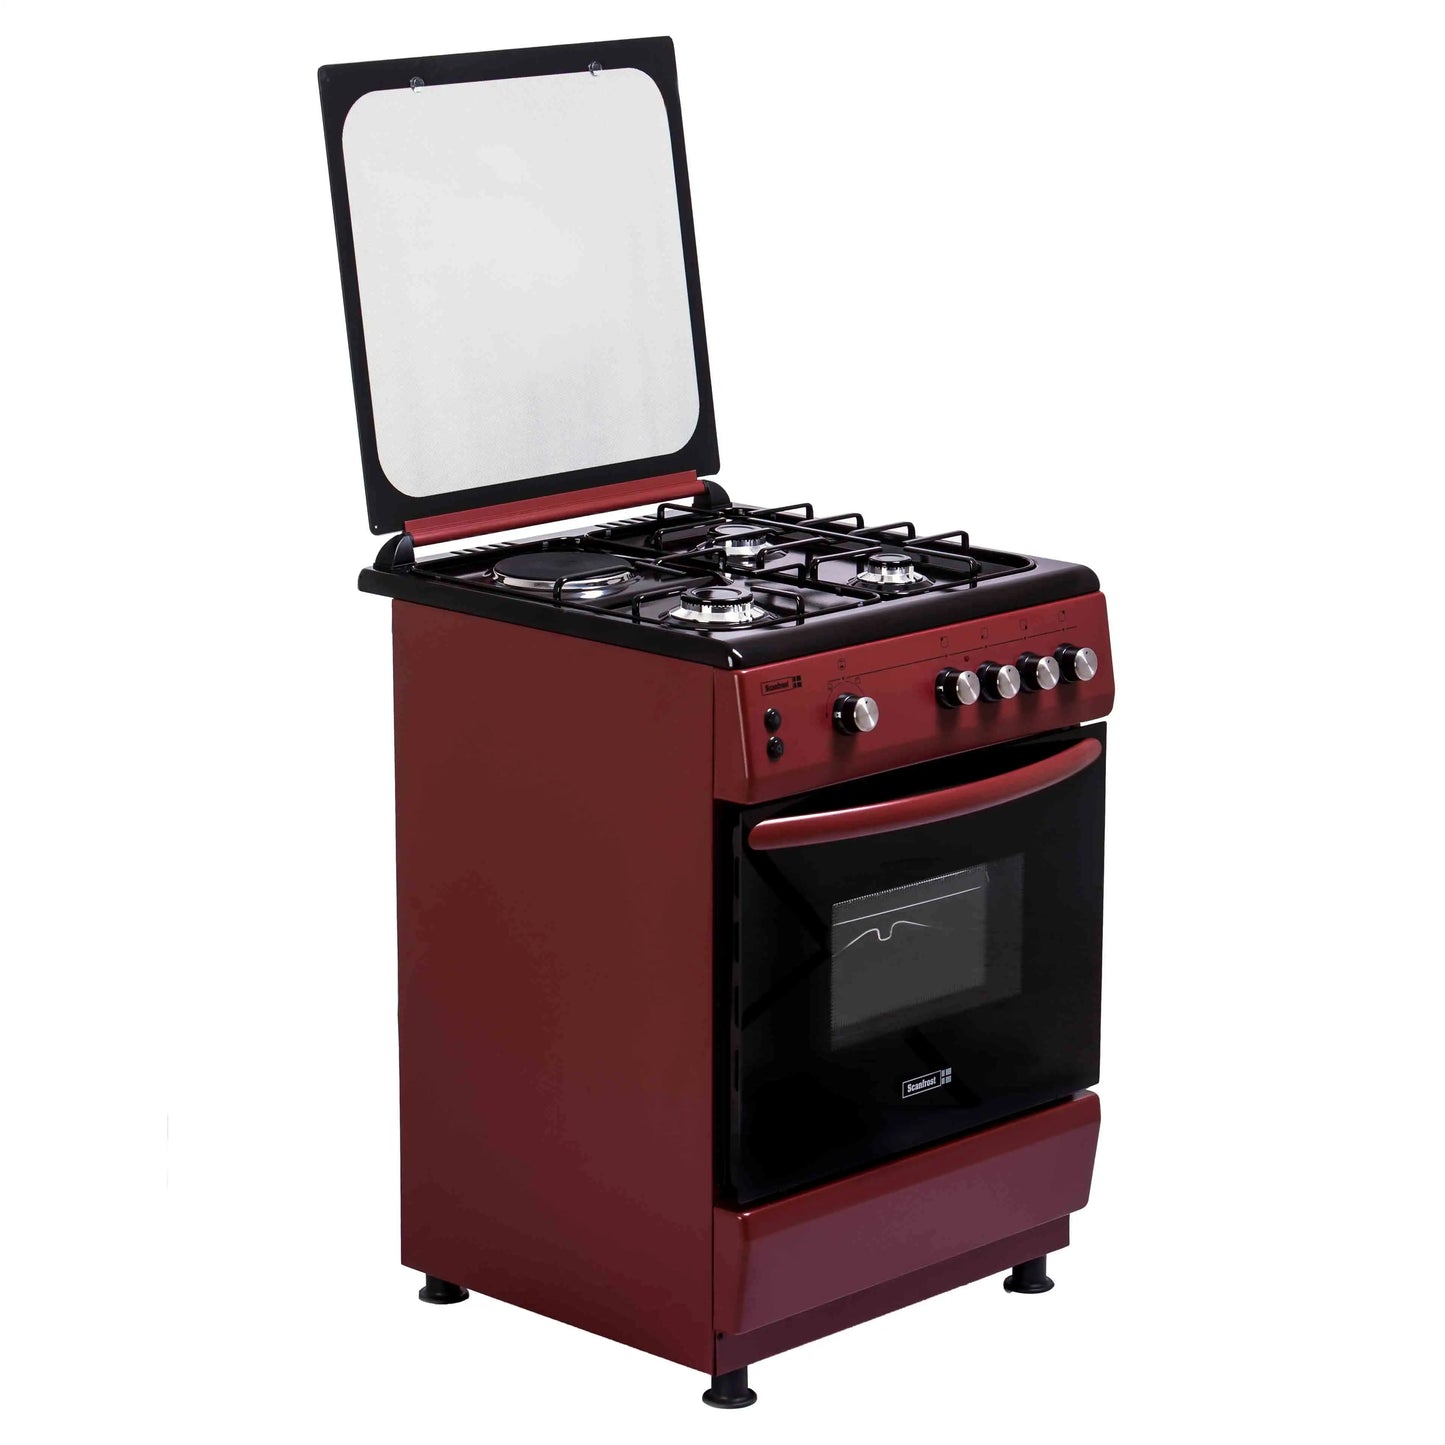 Scanfrost 60x60 3 Gas Burner + 1 Electric Hotplate Standing Cooker   Burgundy – CK6302R